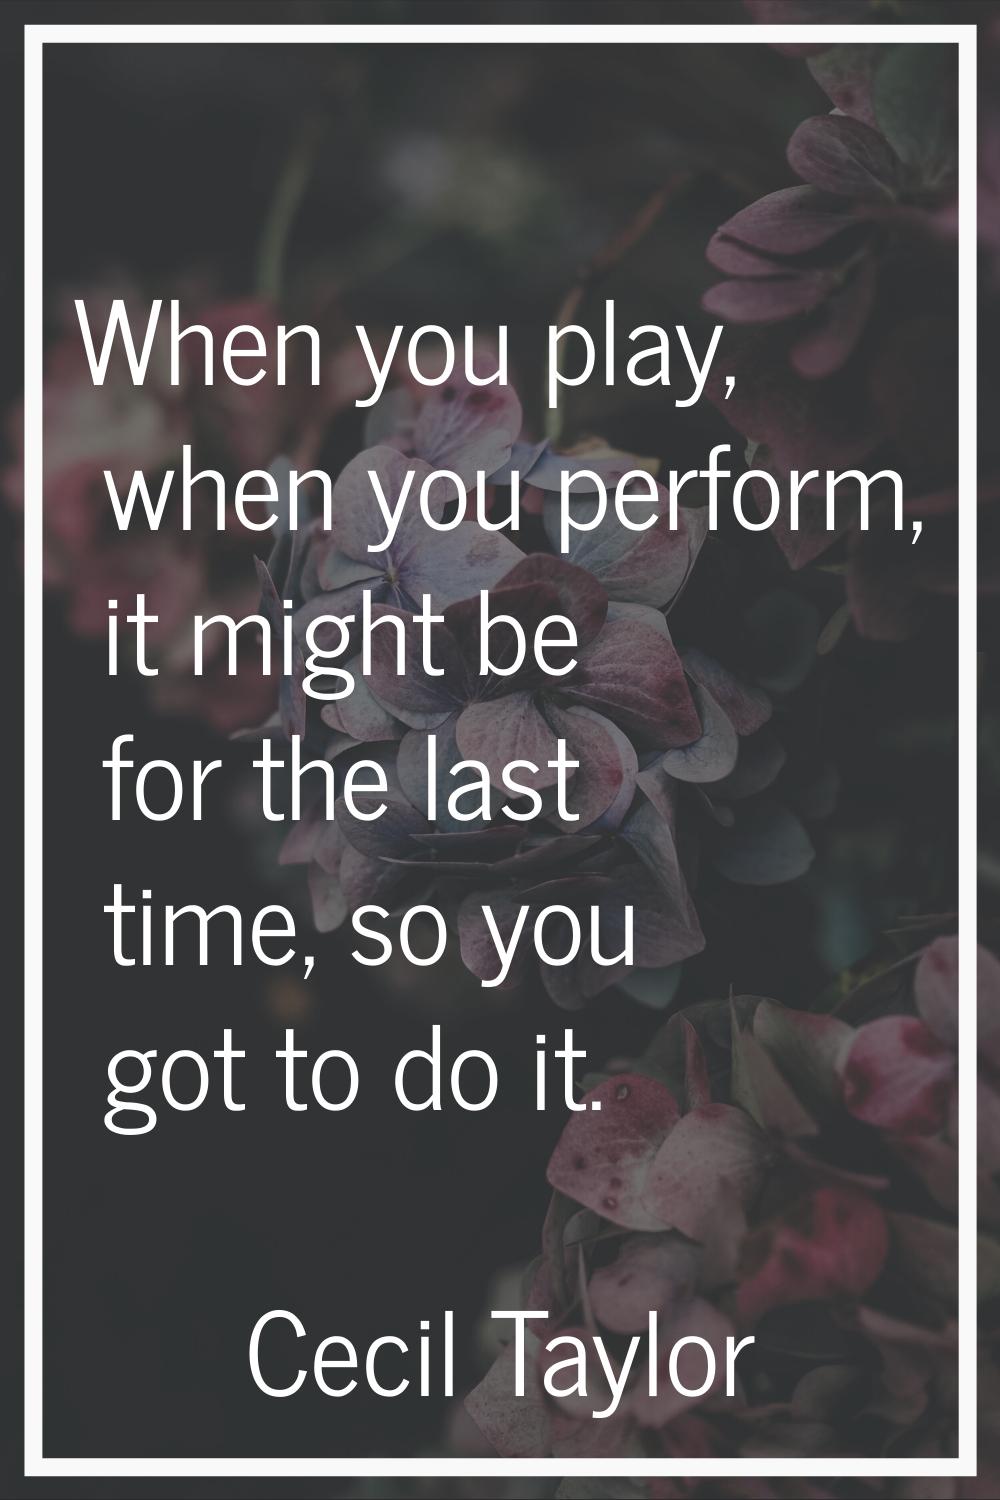 When you play, when you perform, it might be for the last time, so you got to do it.